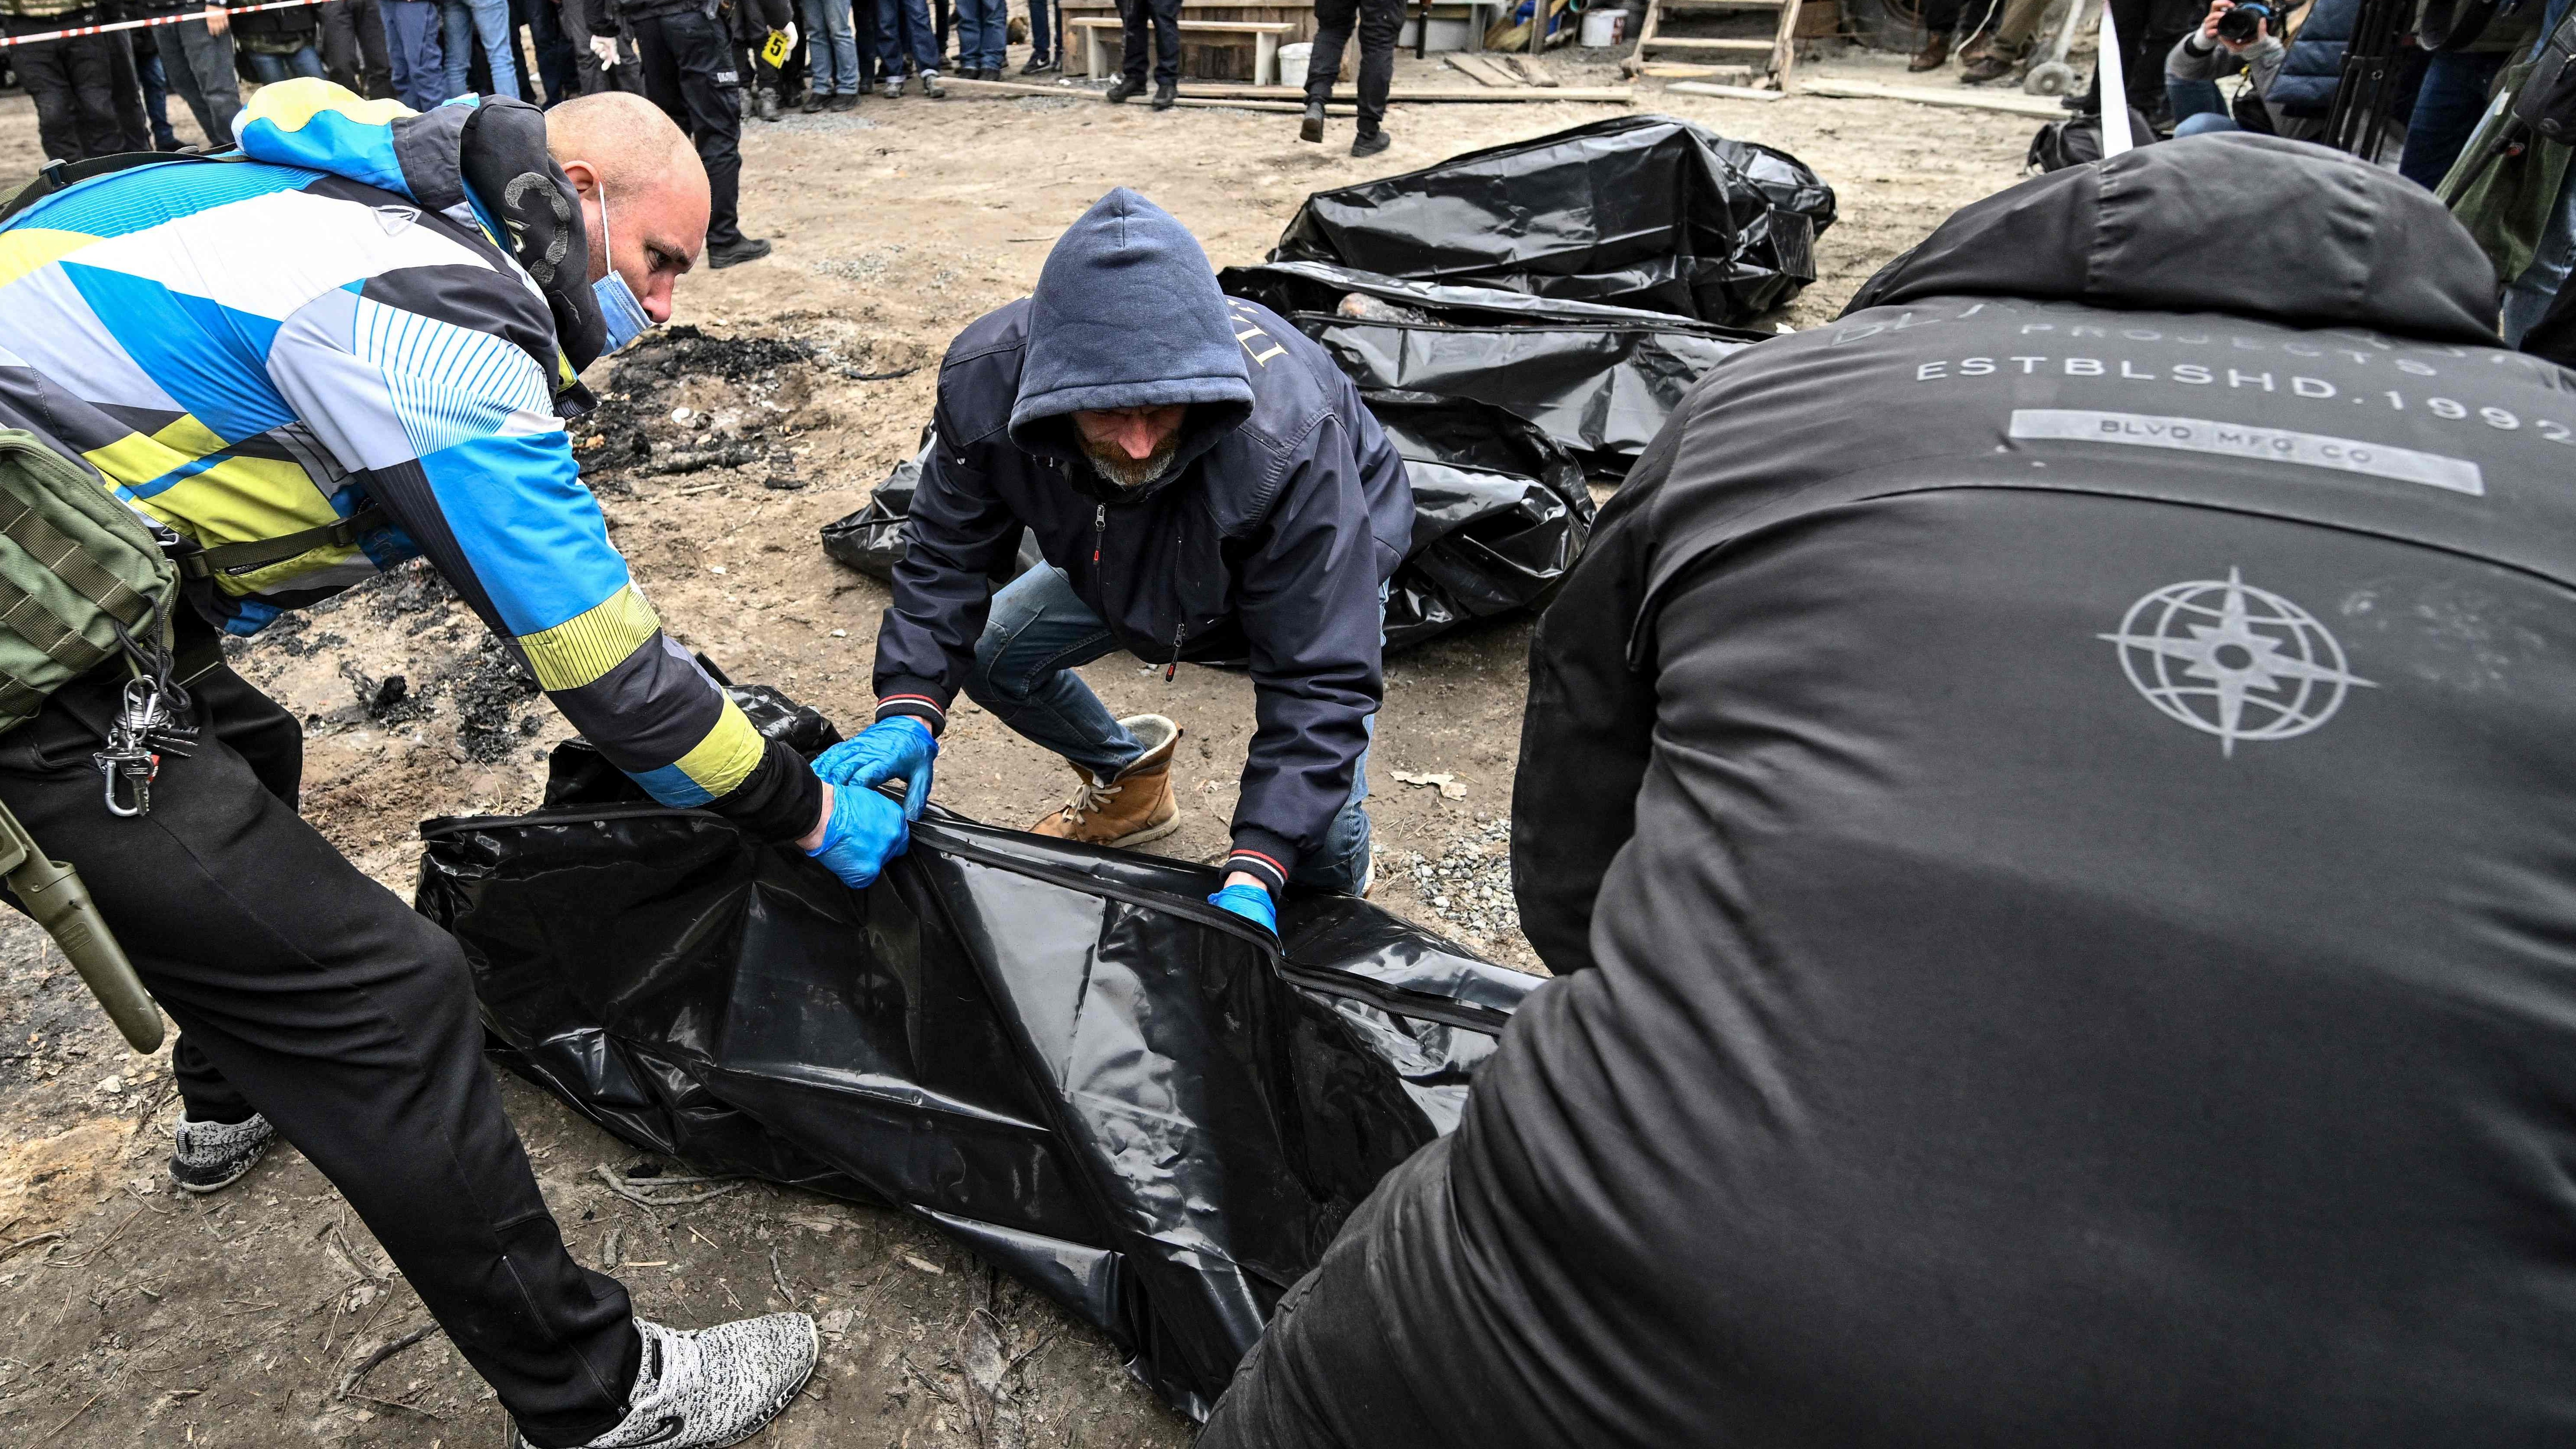 Volunteers put bodies into body bags in the city of Bucha